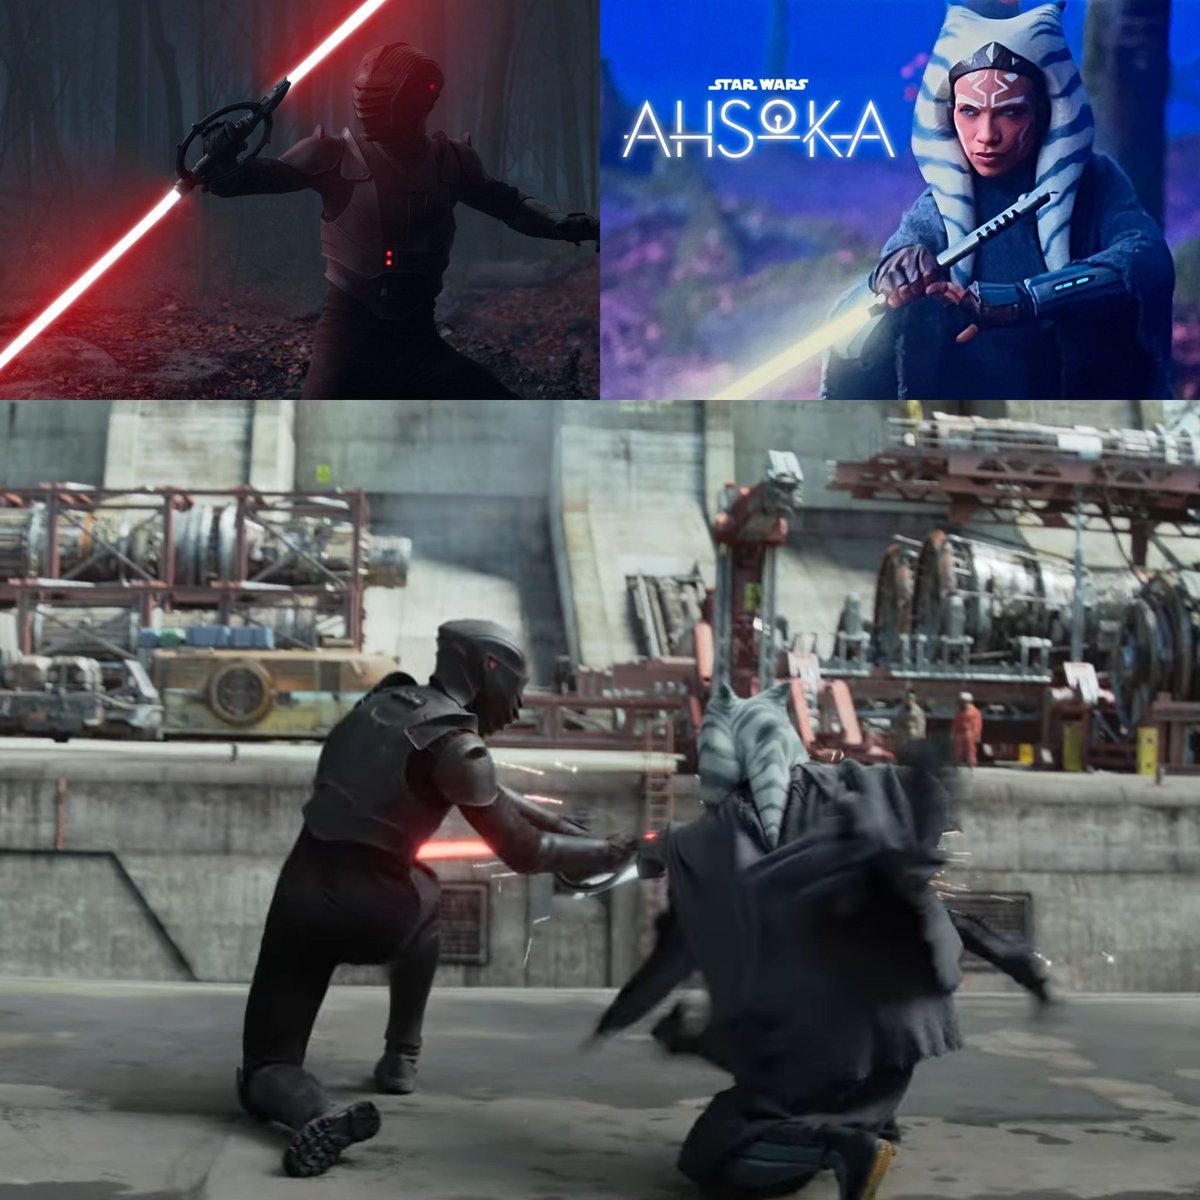 Seems like Ahsoka will duel against this new Inquisitor in two separate places/planets!!